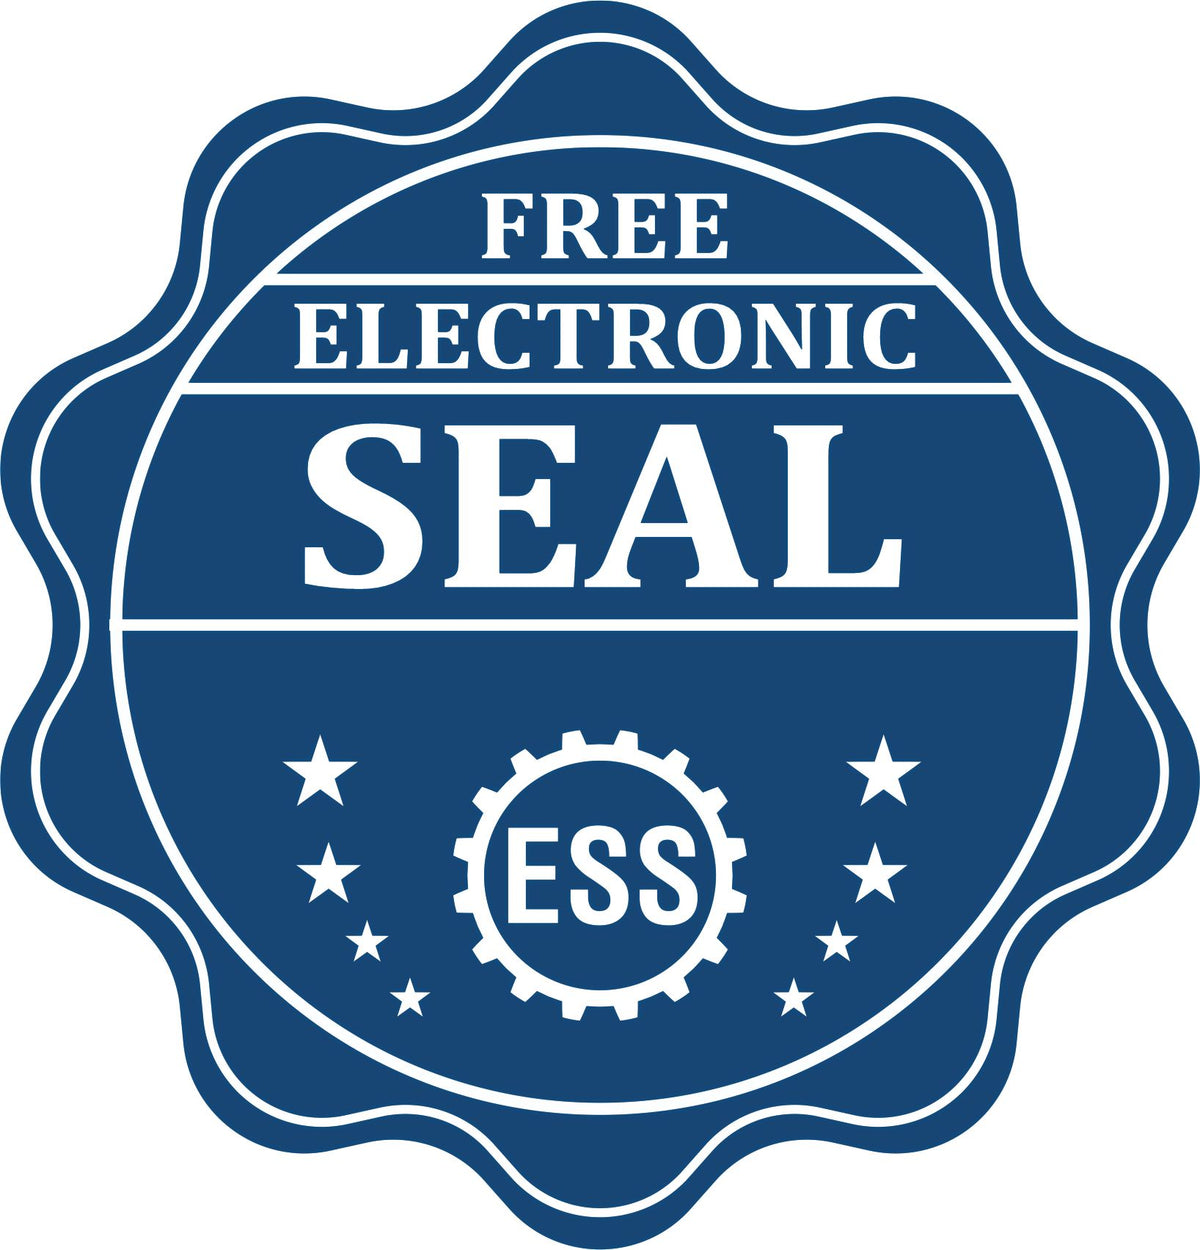 A badge showing a free electronic seal for the Louisiana Engineer Desk Seal with stars and the ESS gear on the emblem.